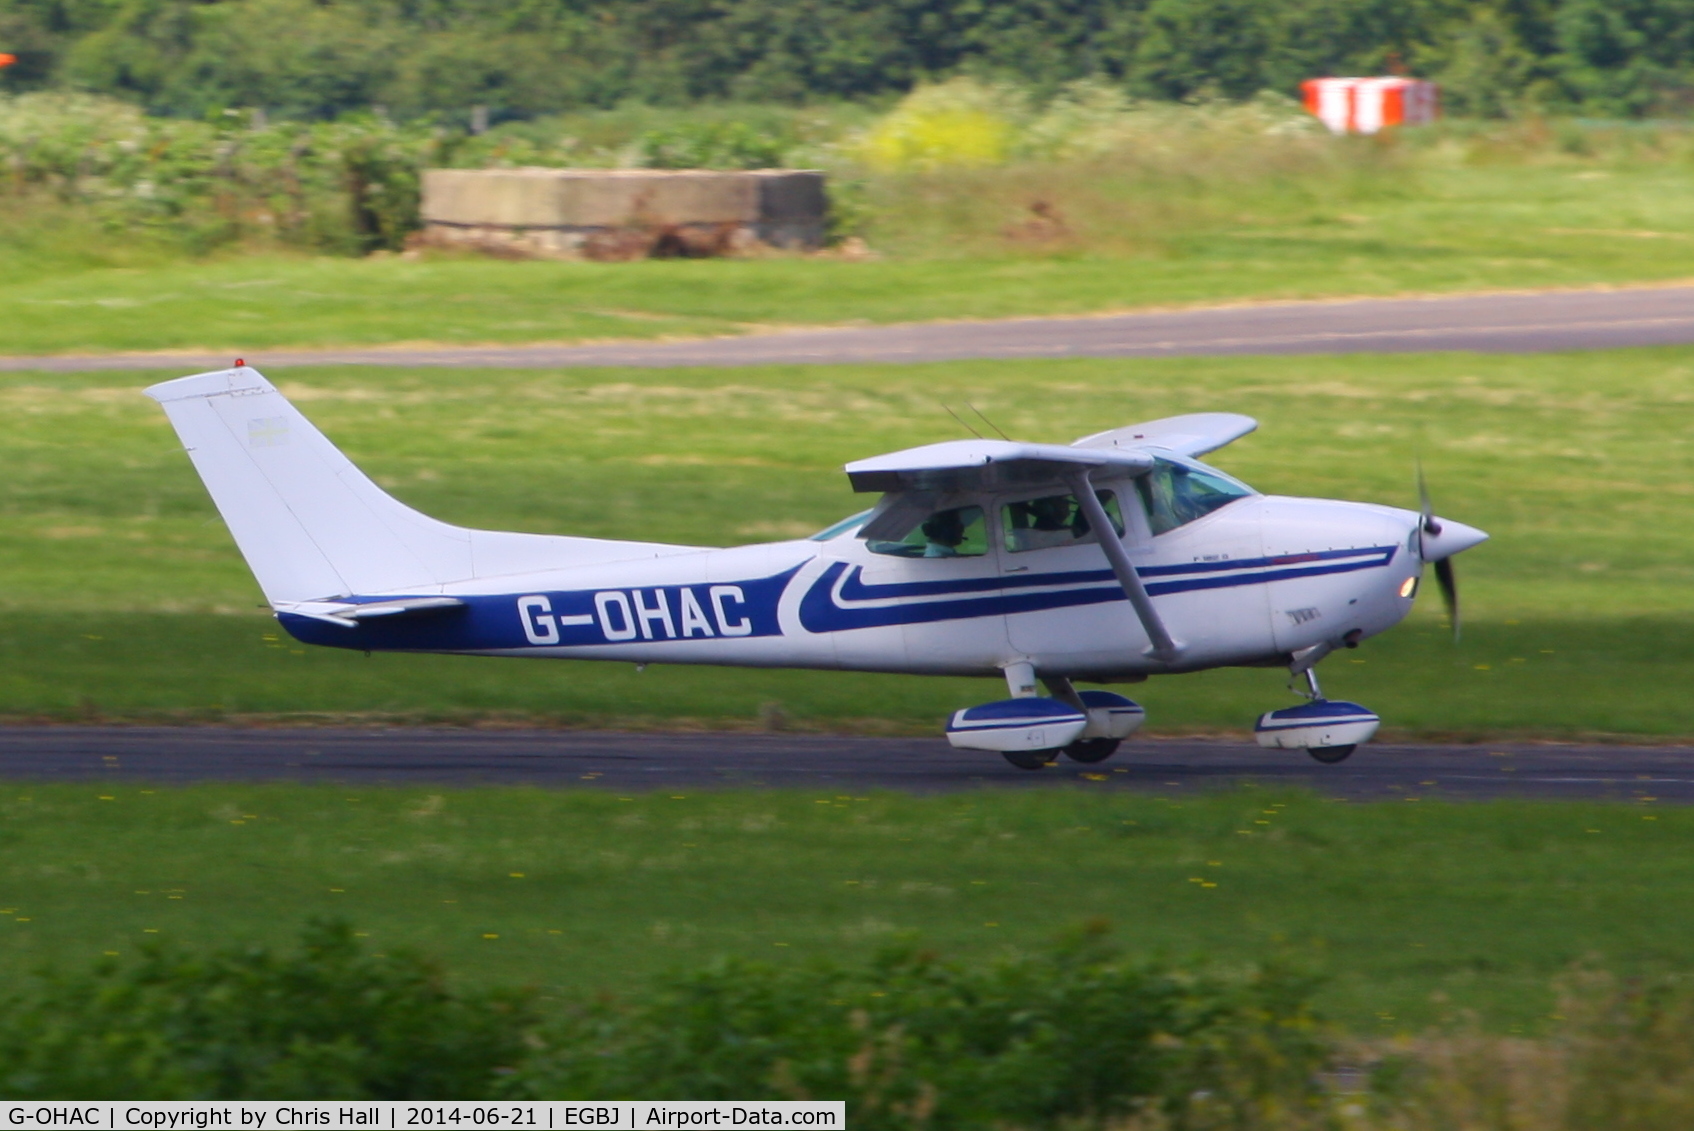 G-OHAC, 1977 Reims F182Q Skylane C/N 0048, Visitor for Project Propeller 2014